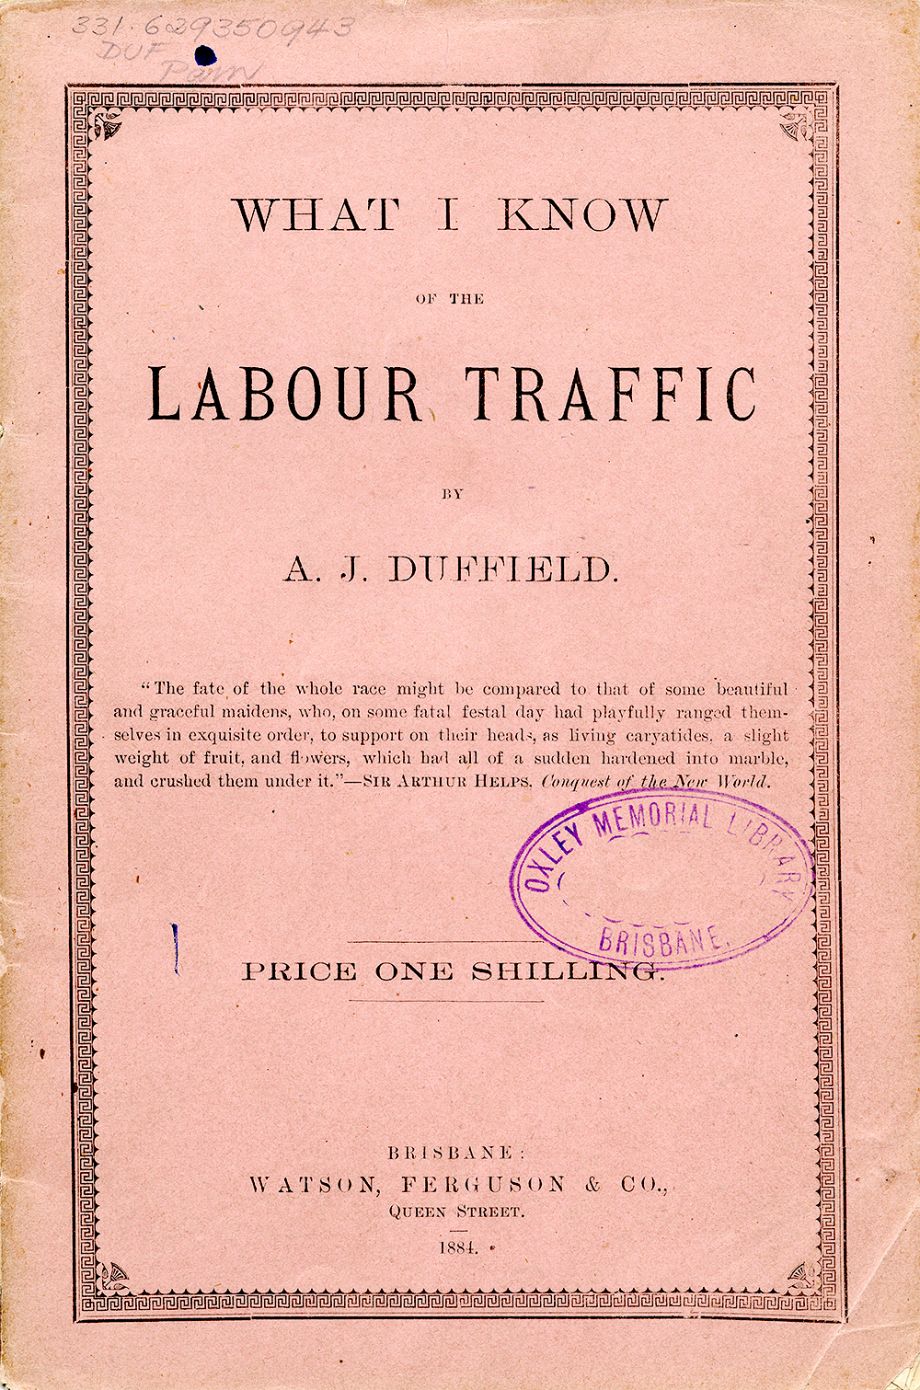 1884 What I know of the Labour Traffic by A.J. Duffield. Brisbane : Watson, Ferguson & Co. :1884. 